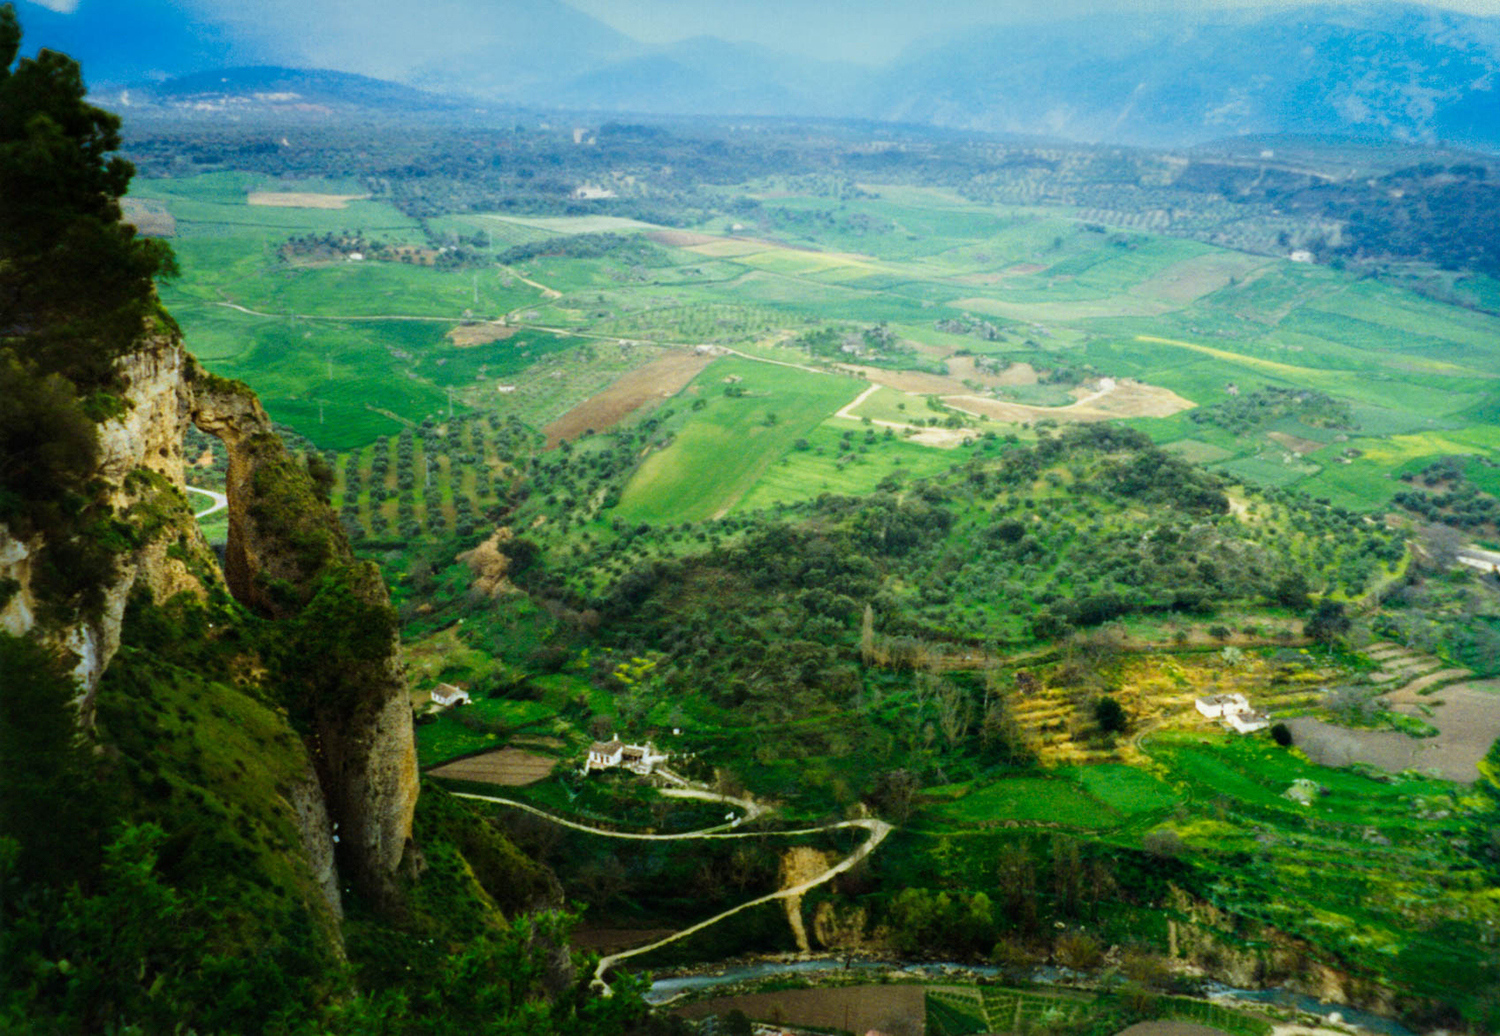 <p>A view over farm fields from the impressive clifftop town of Ronda, in Andalucia.</p>